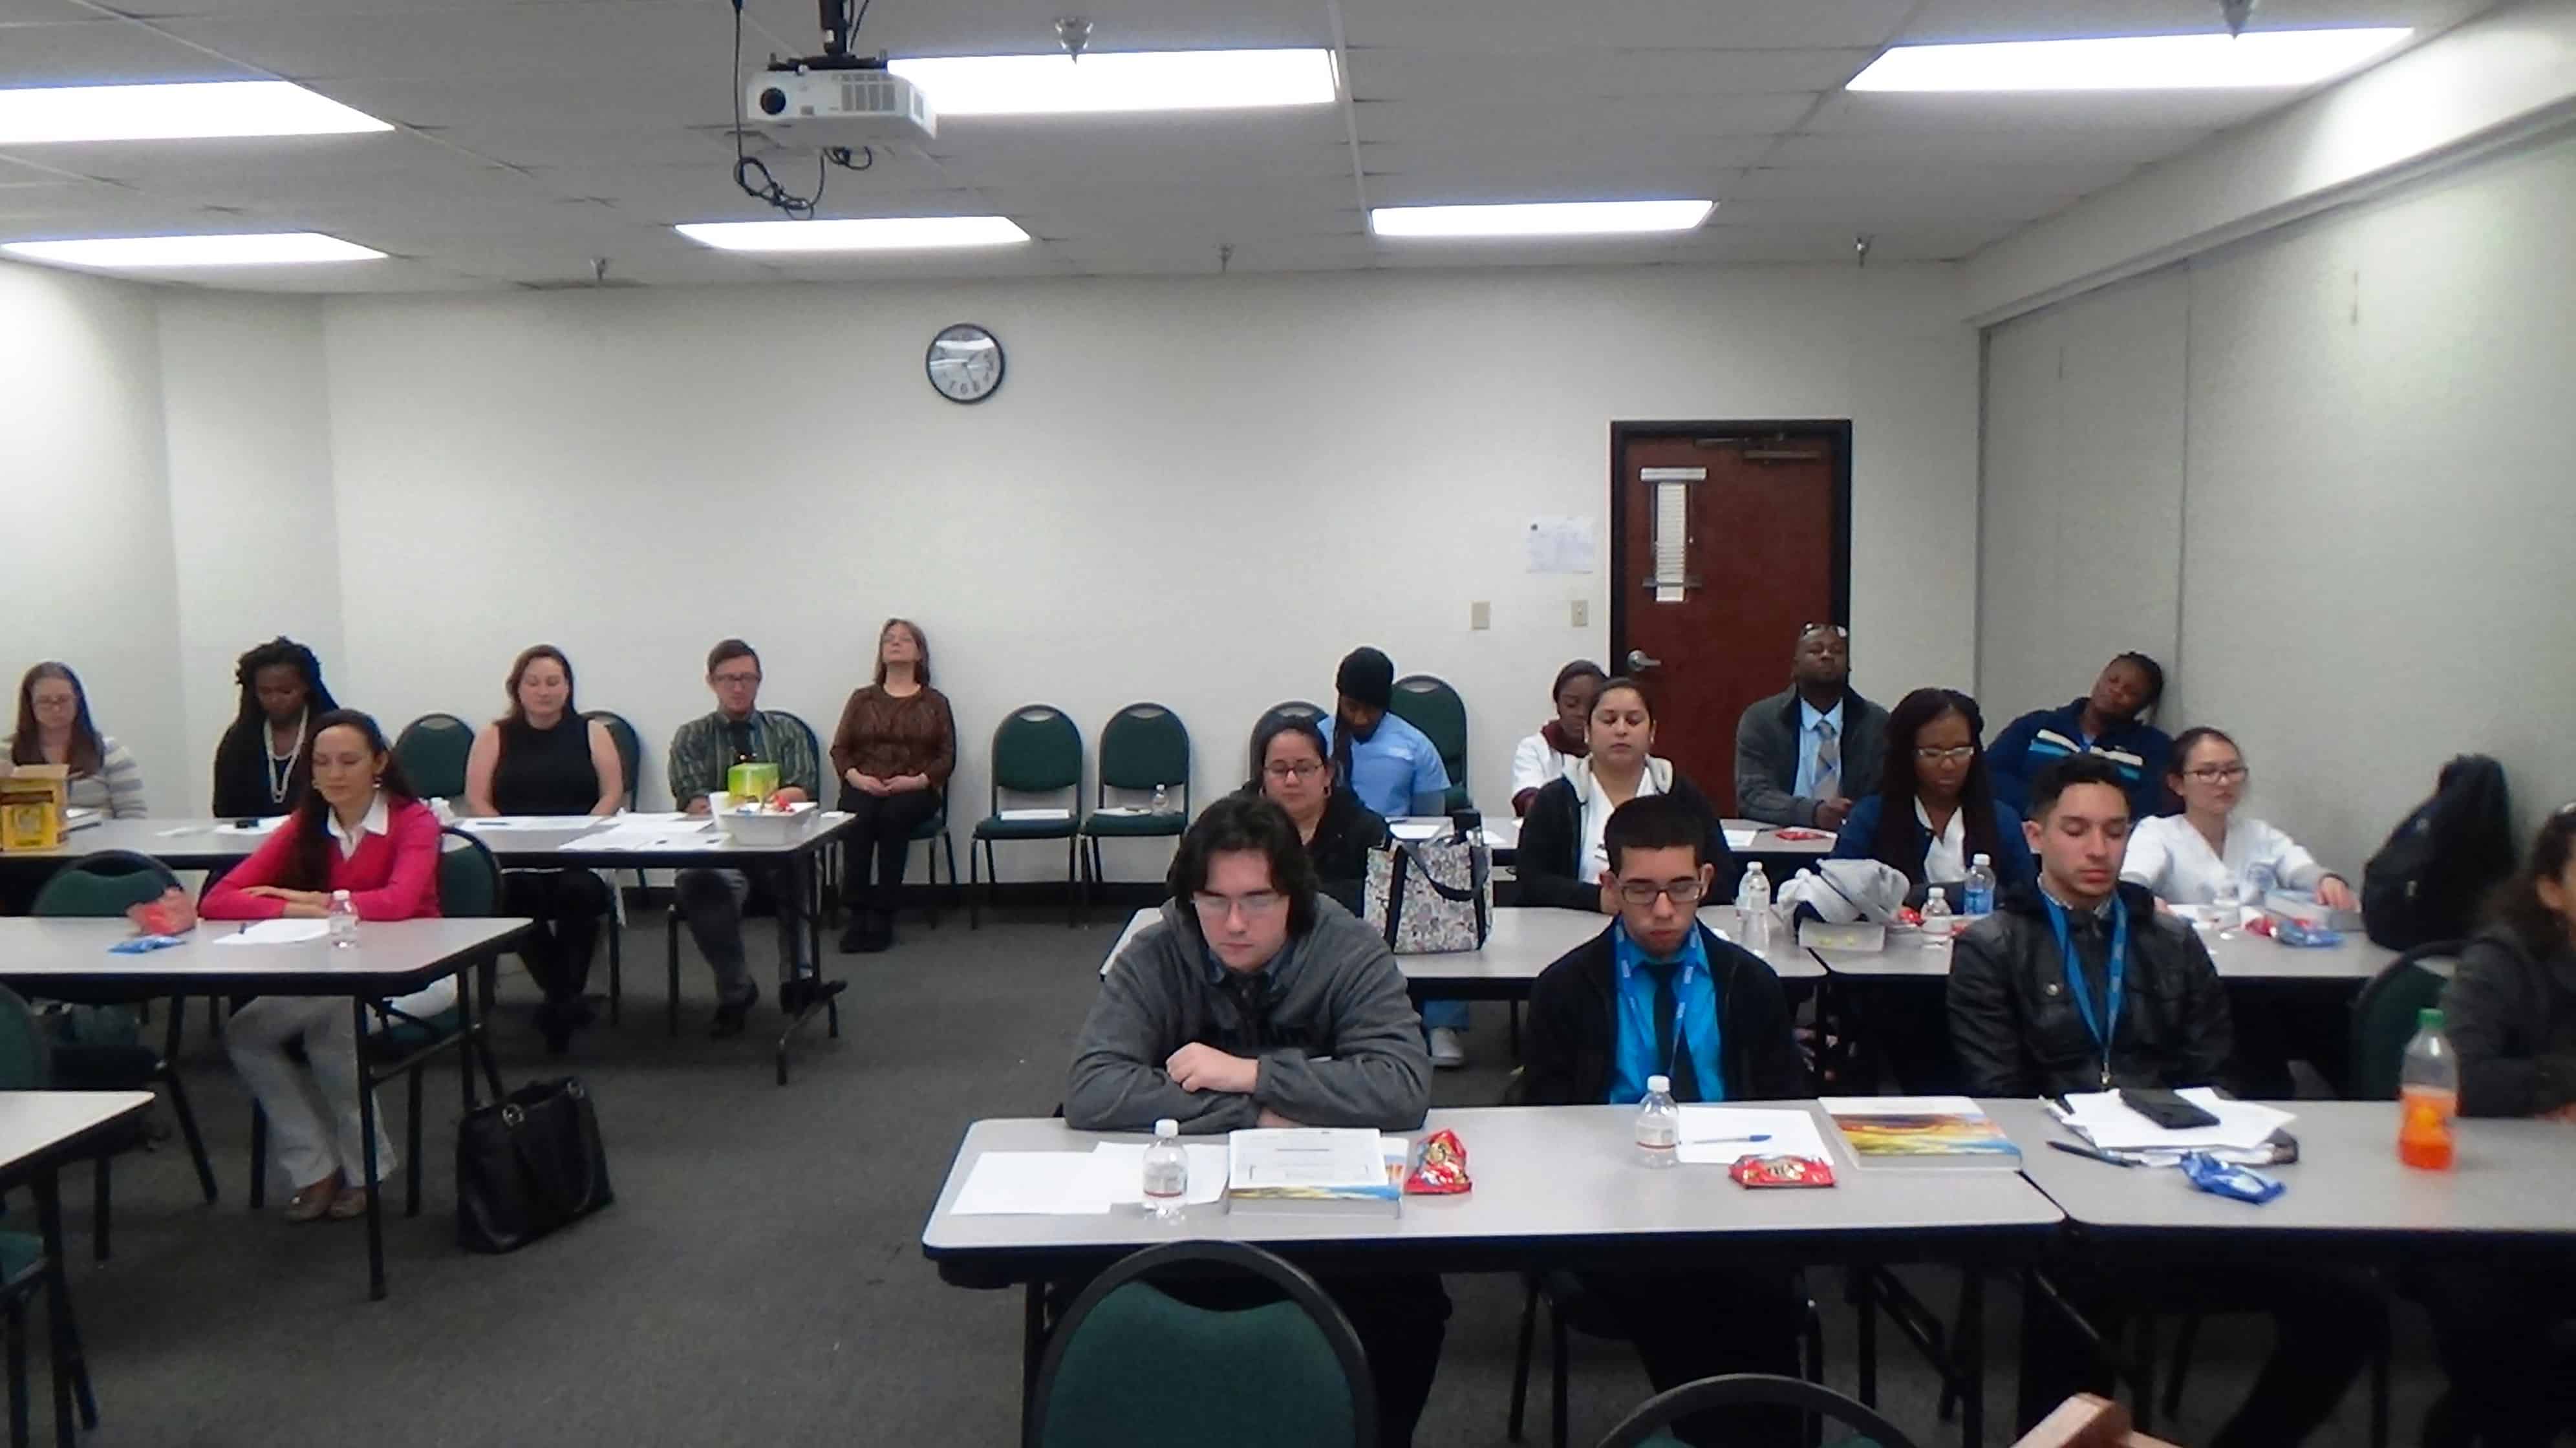 Orlando Held a Lunch & Learn Dealing with Test Anxiety and Study Skills